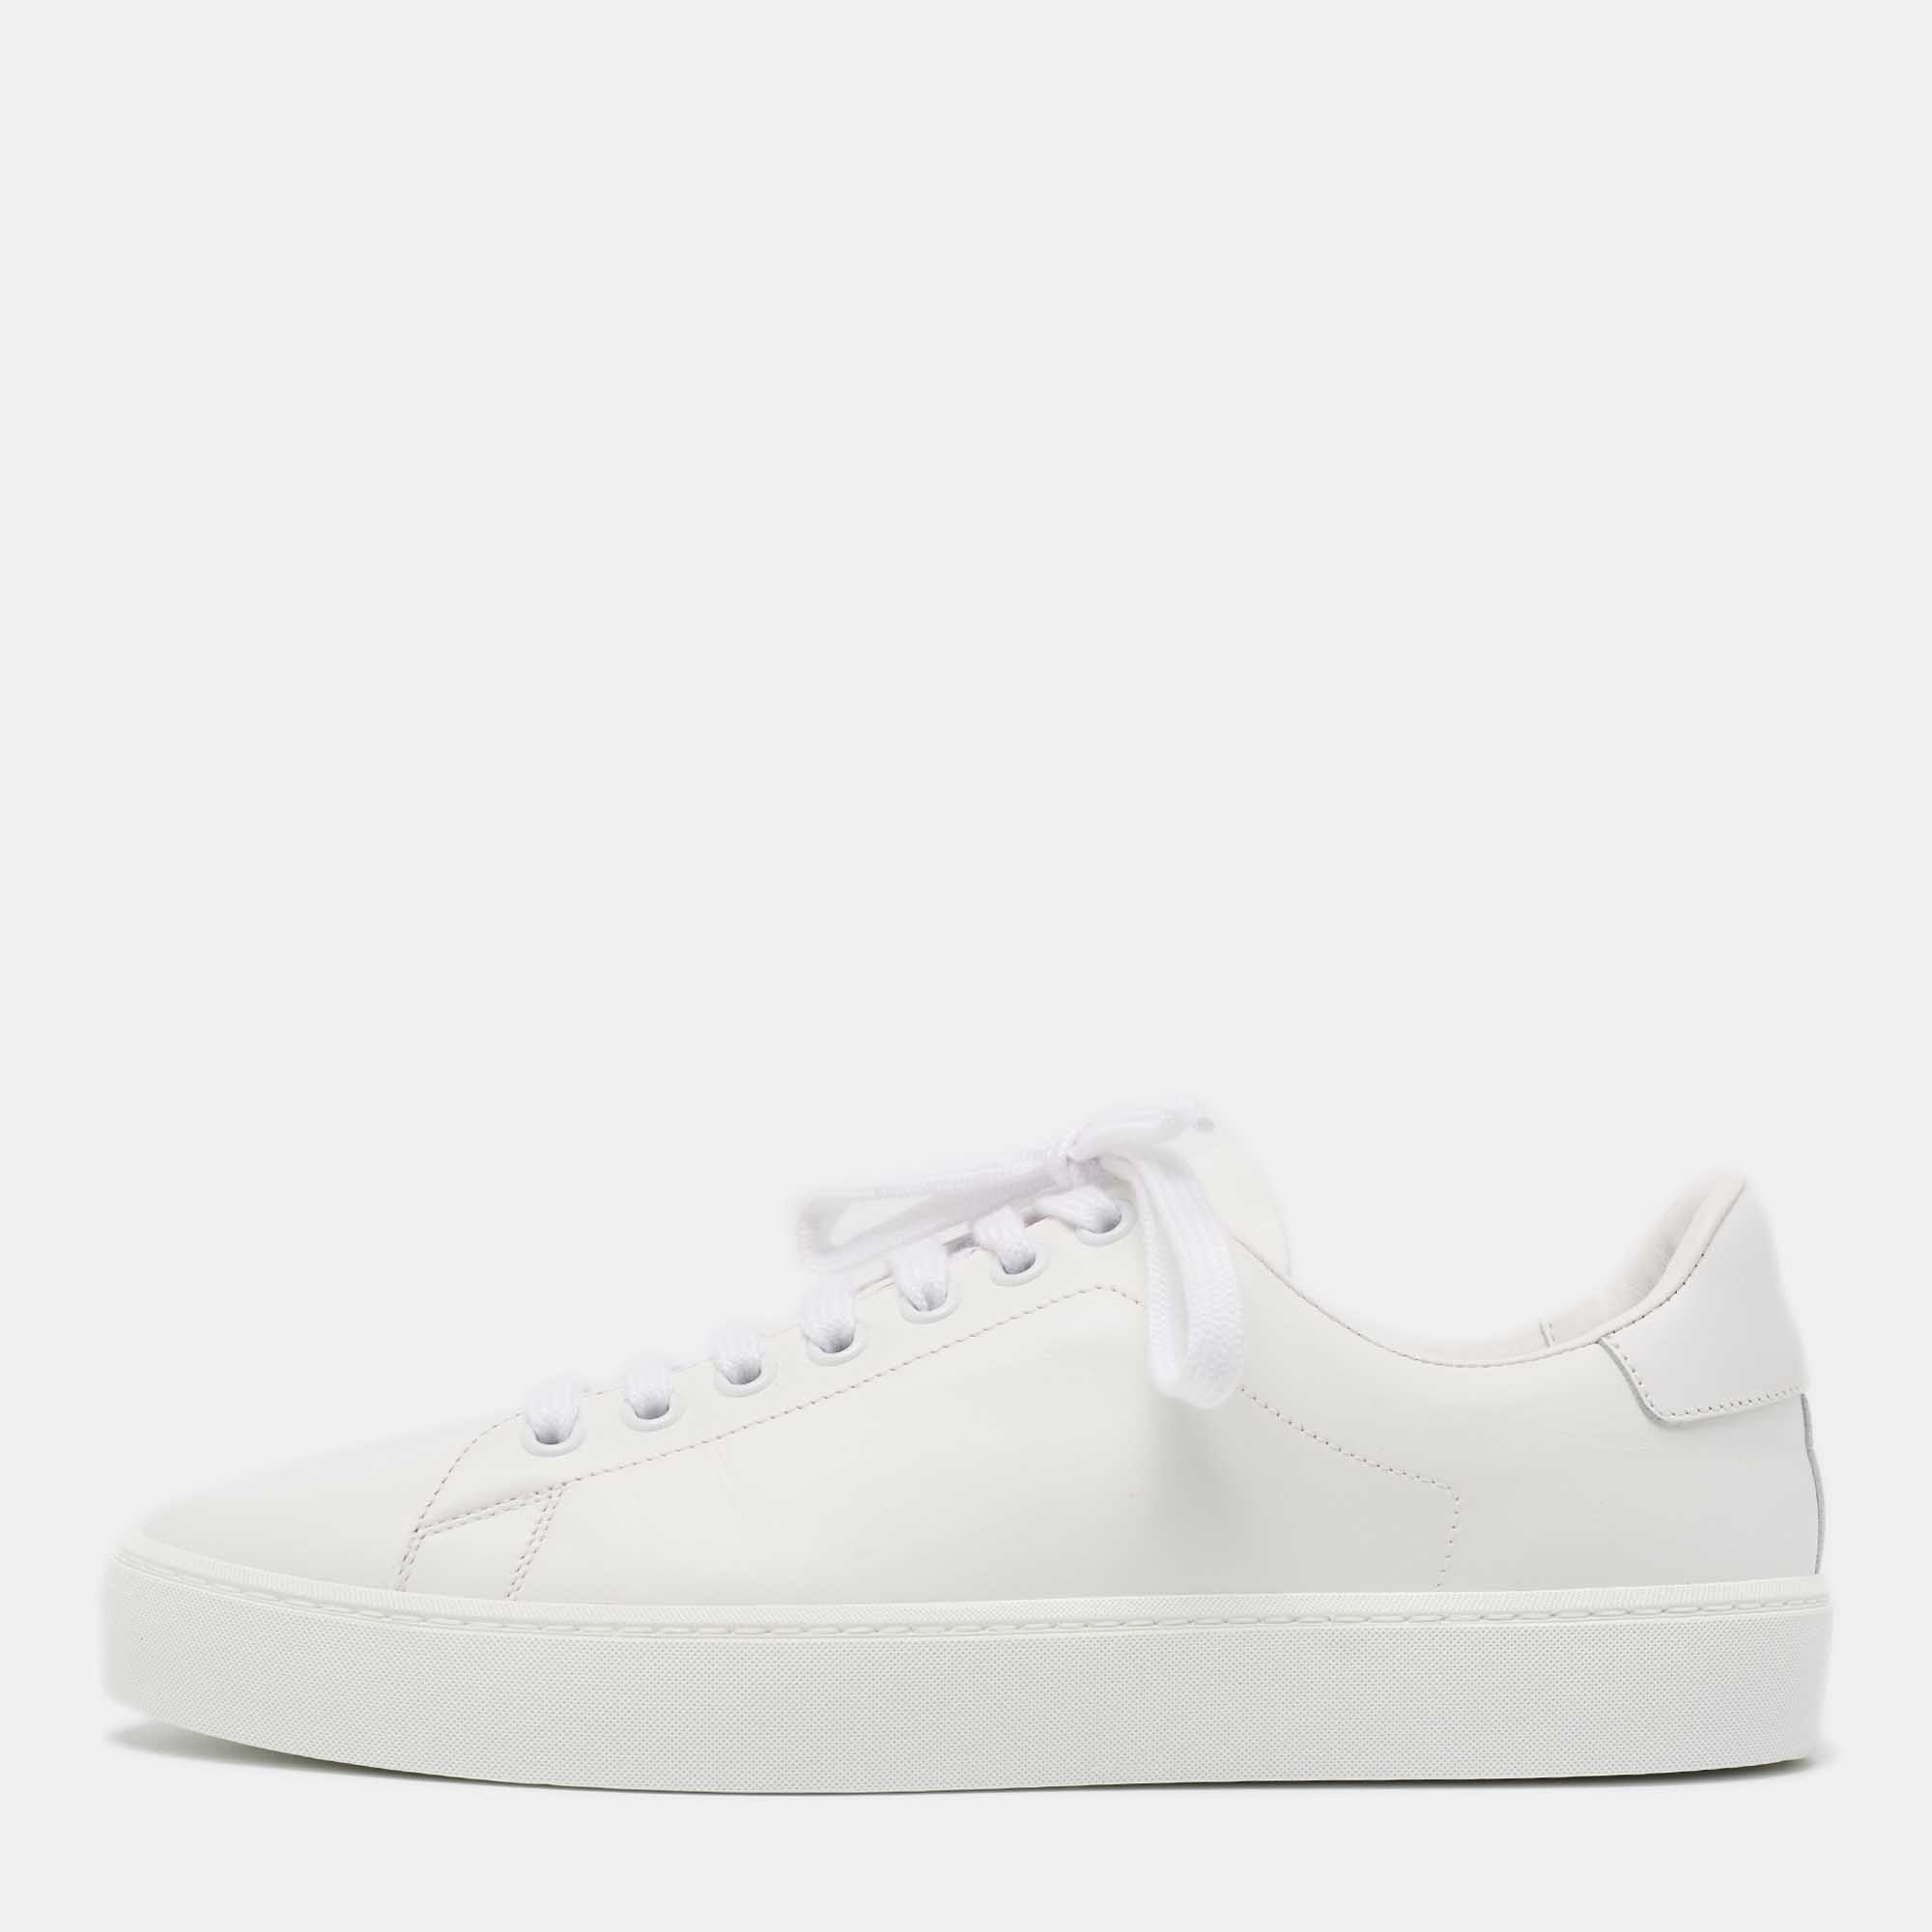 Burberry white leather westford low top sneakers size 39.5